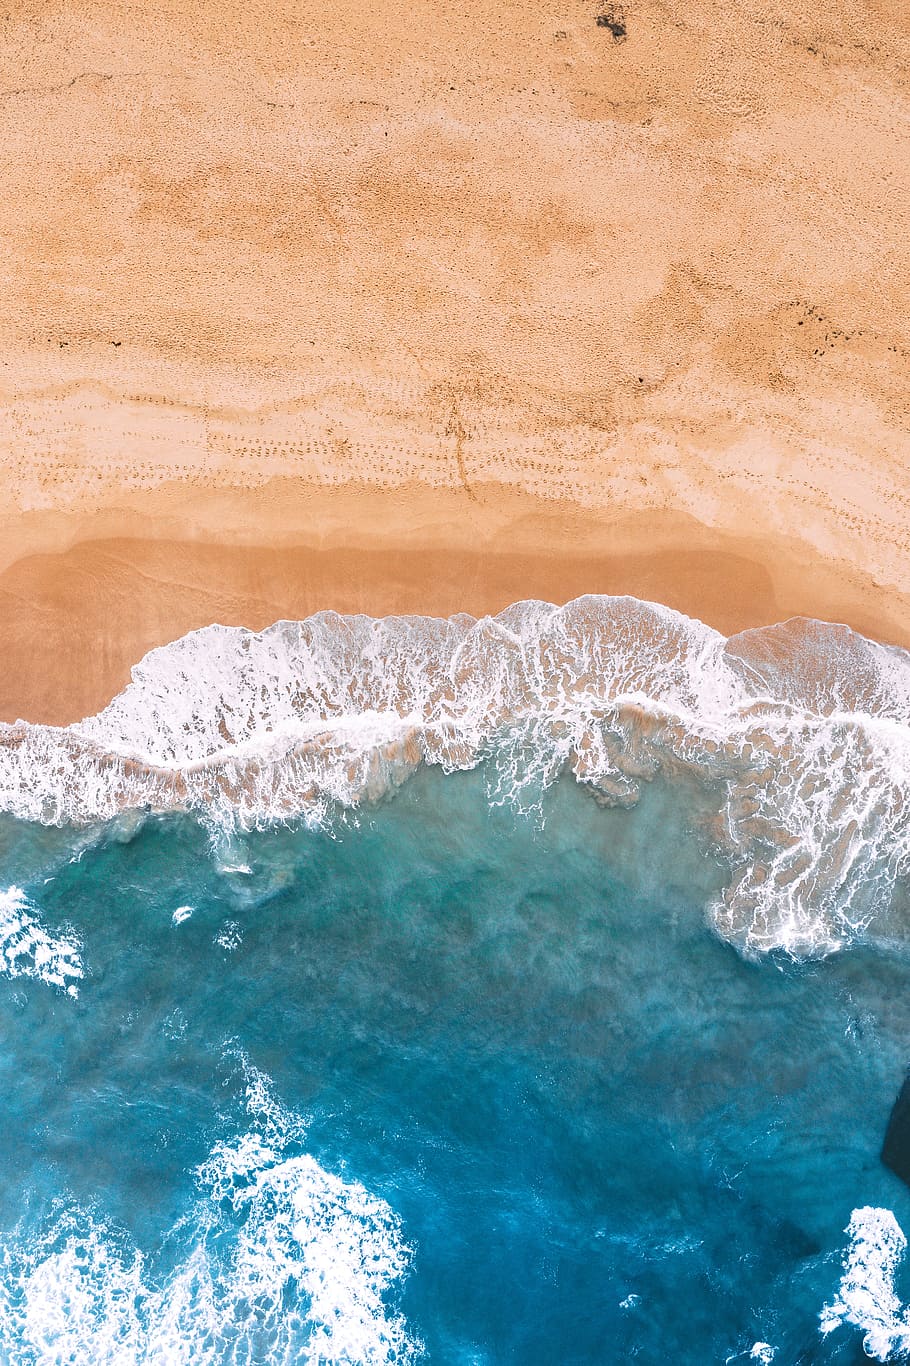 Free Download Hd Wallpaper Sea Waves On Brown Sand Drone View Aerial View Beach Coast